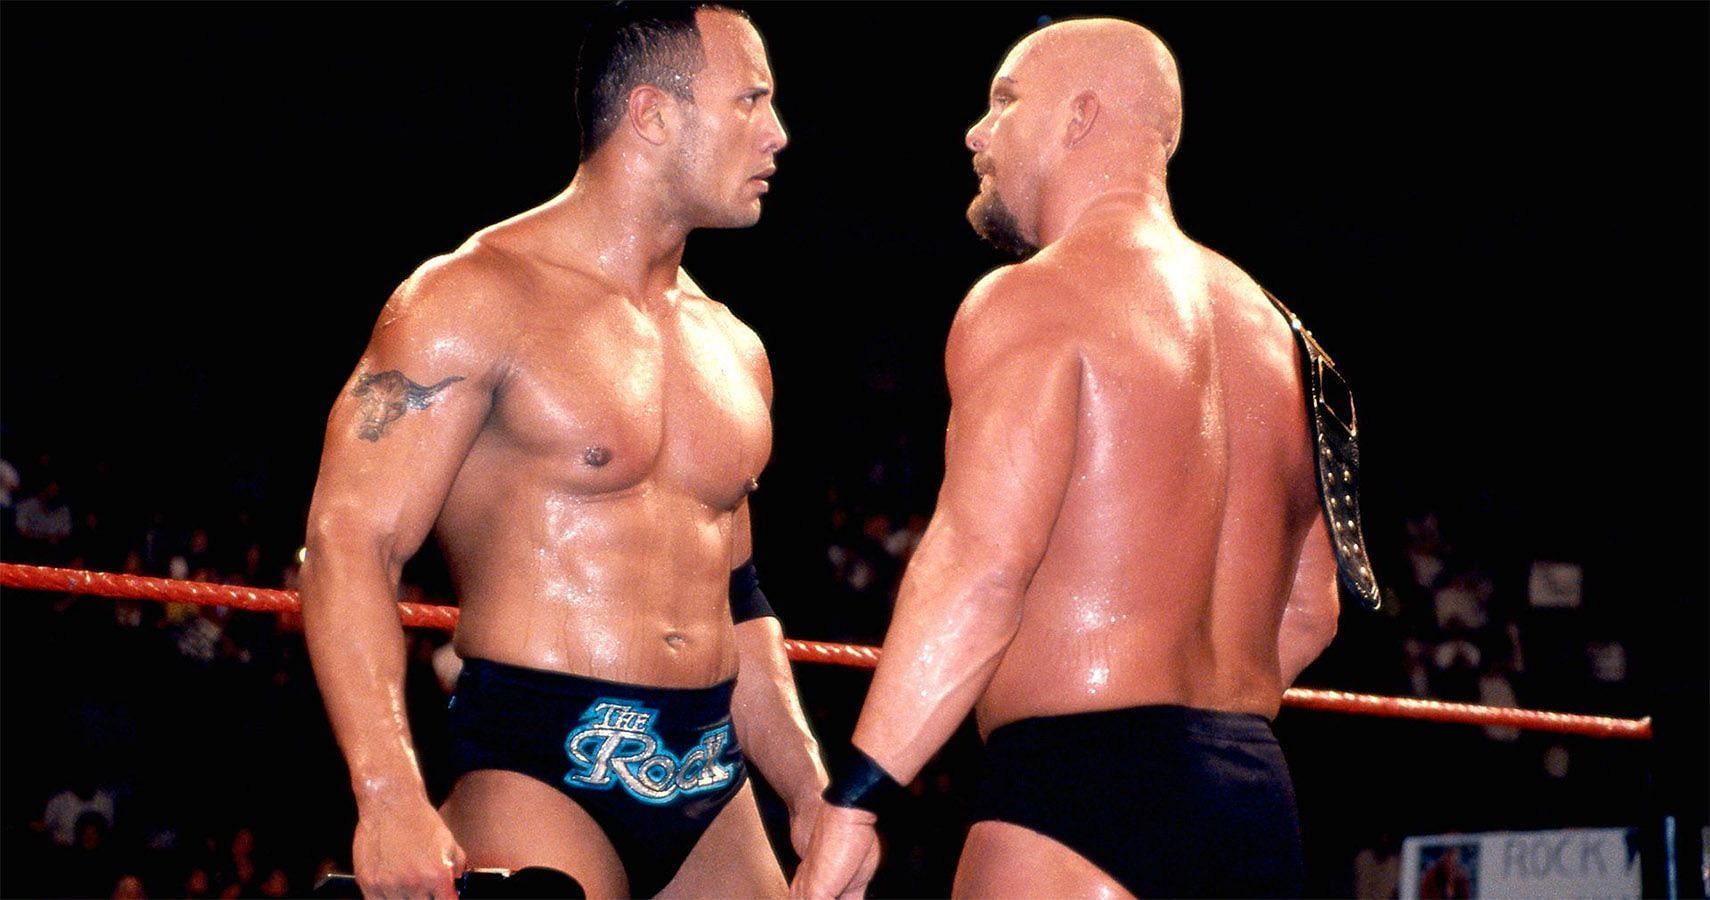 Some of the most iconic feuds in WWE history have been defined by memorable trilogies.